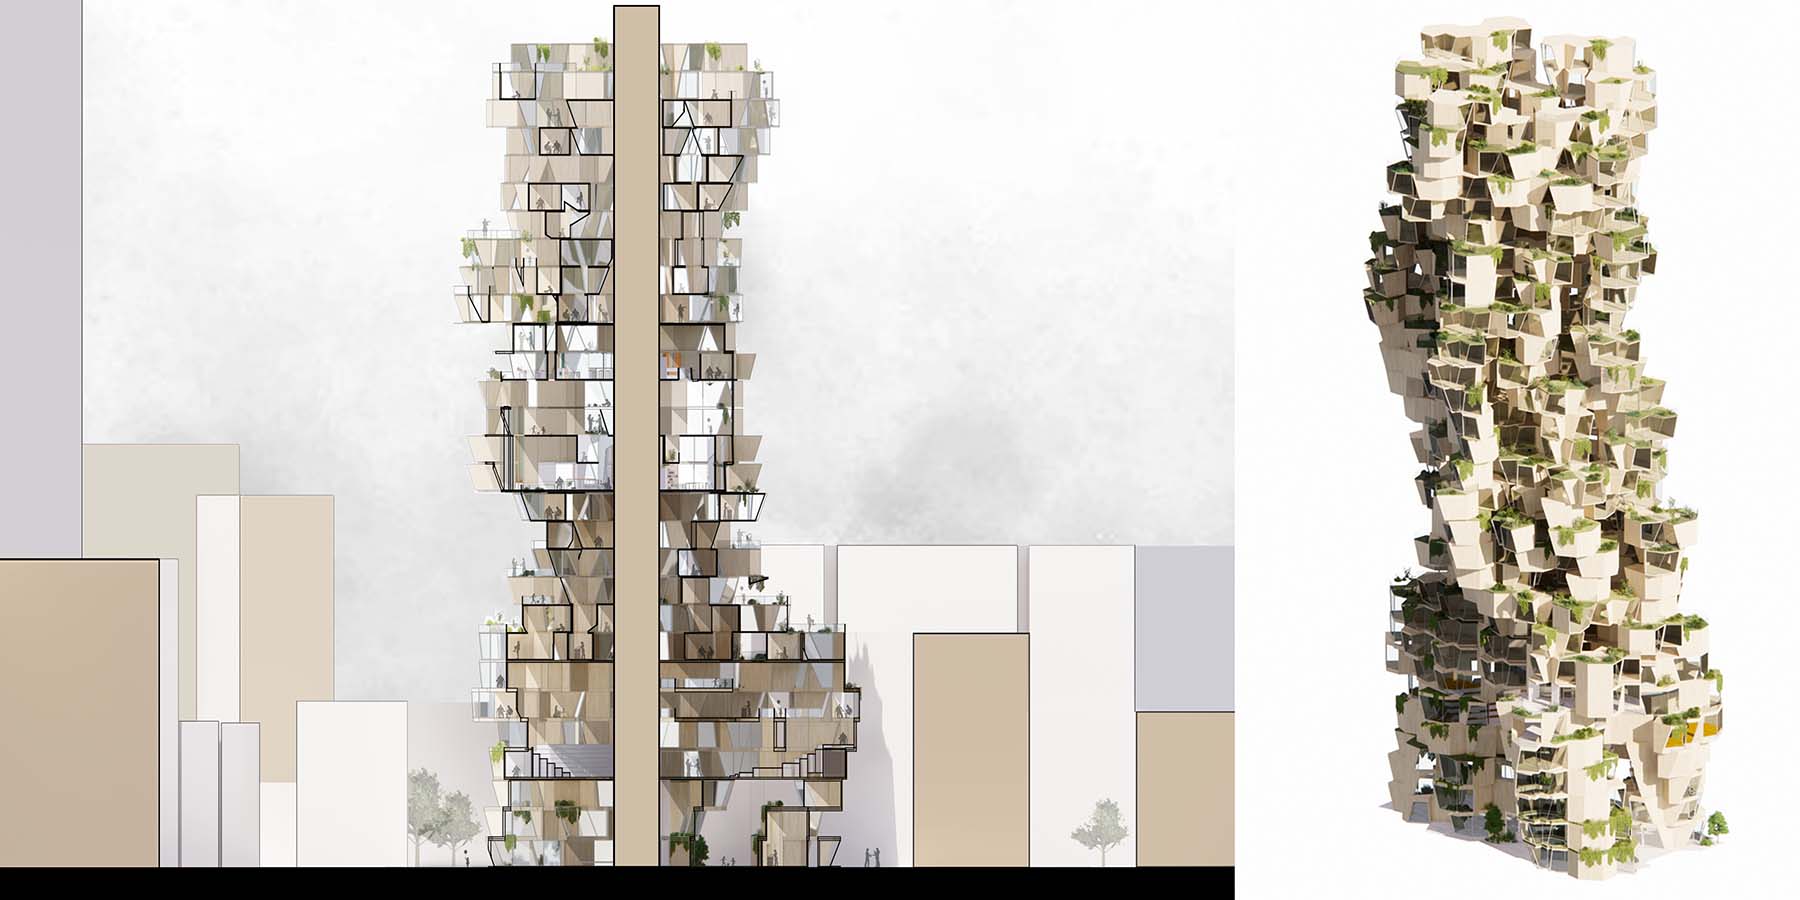 The finalised tower form, showcasing the embodiment of an overall cascading effects across it's exterior domain.